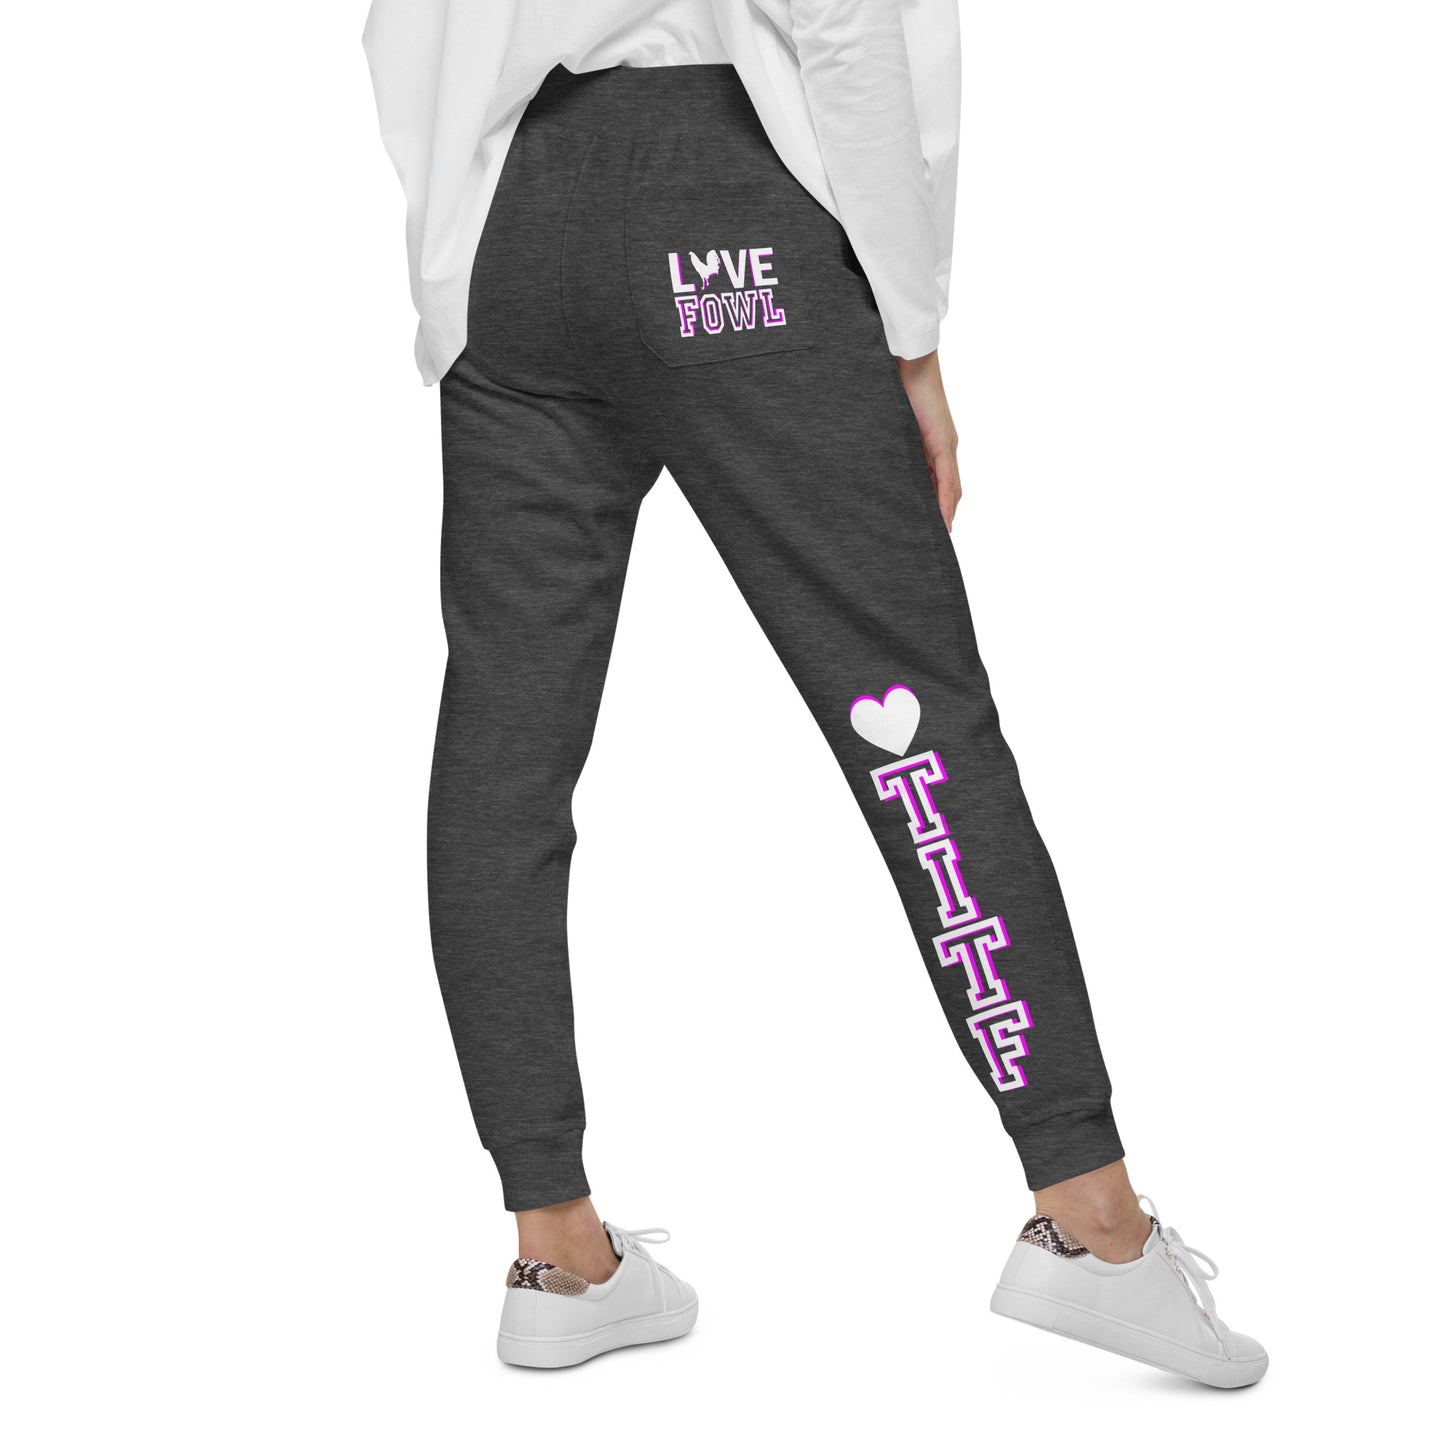 Unisex PINK WHITE VS LOVE FOWL Gamefowl Rooster Sweatpants